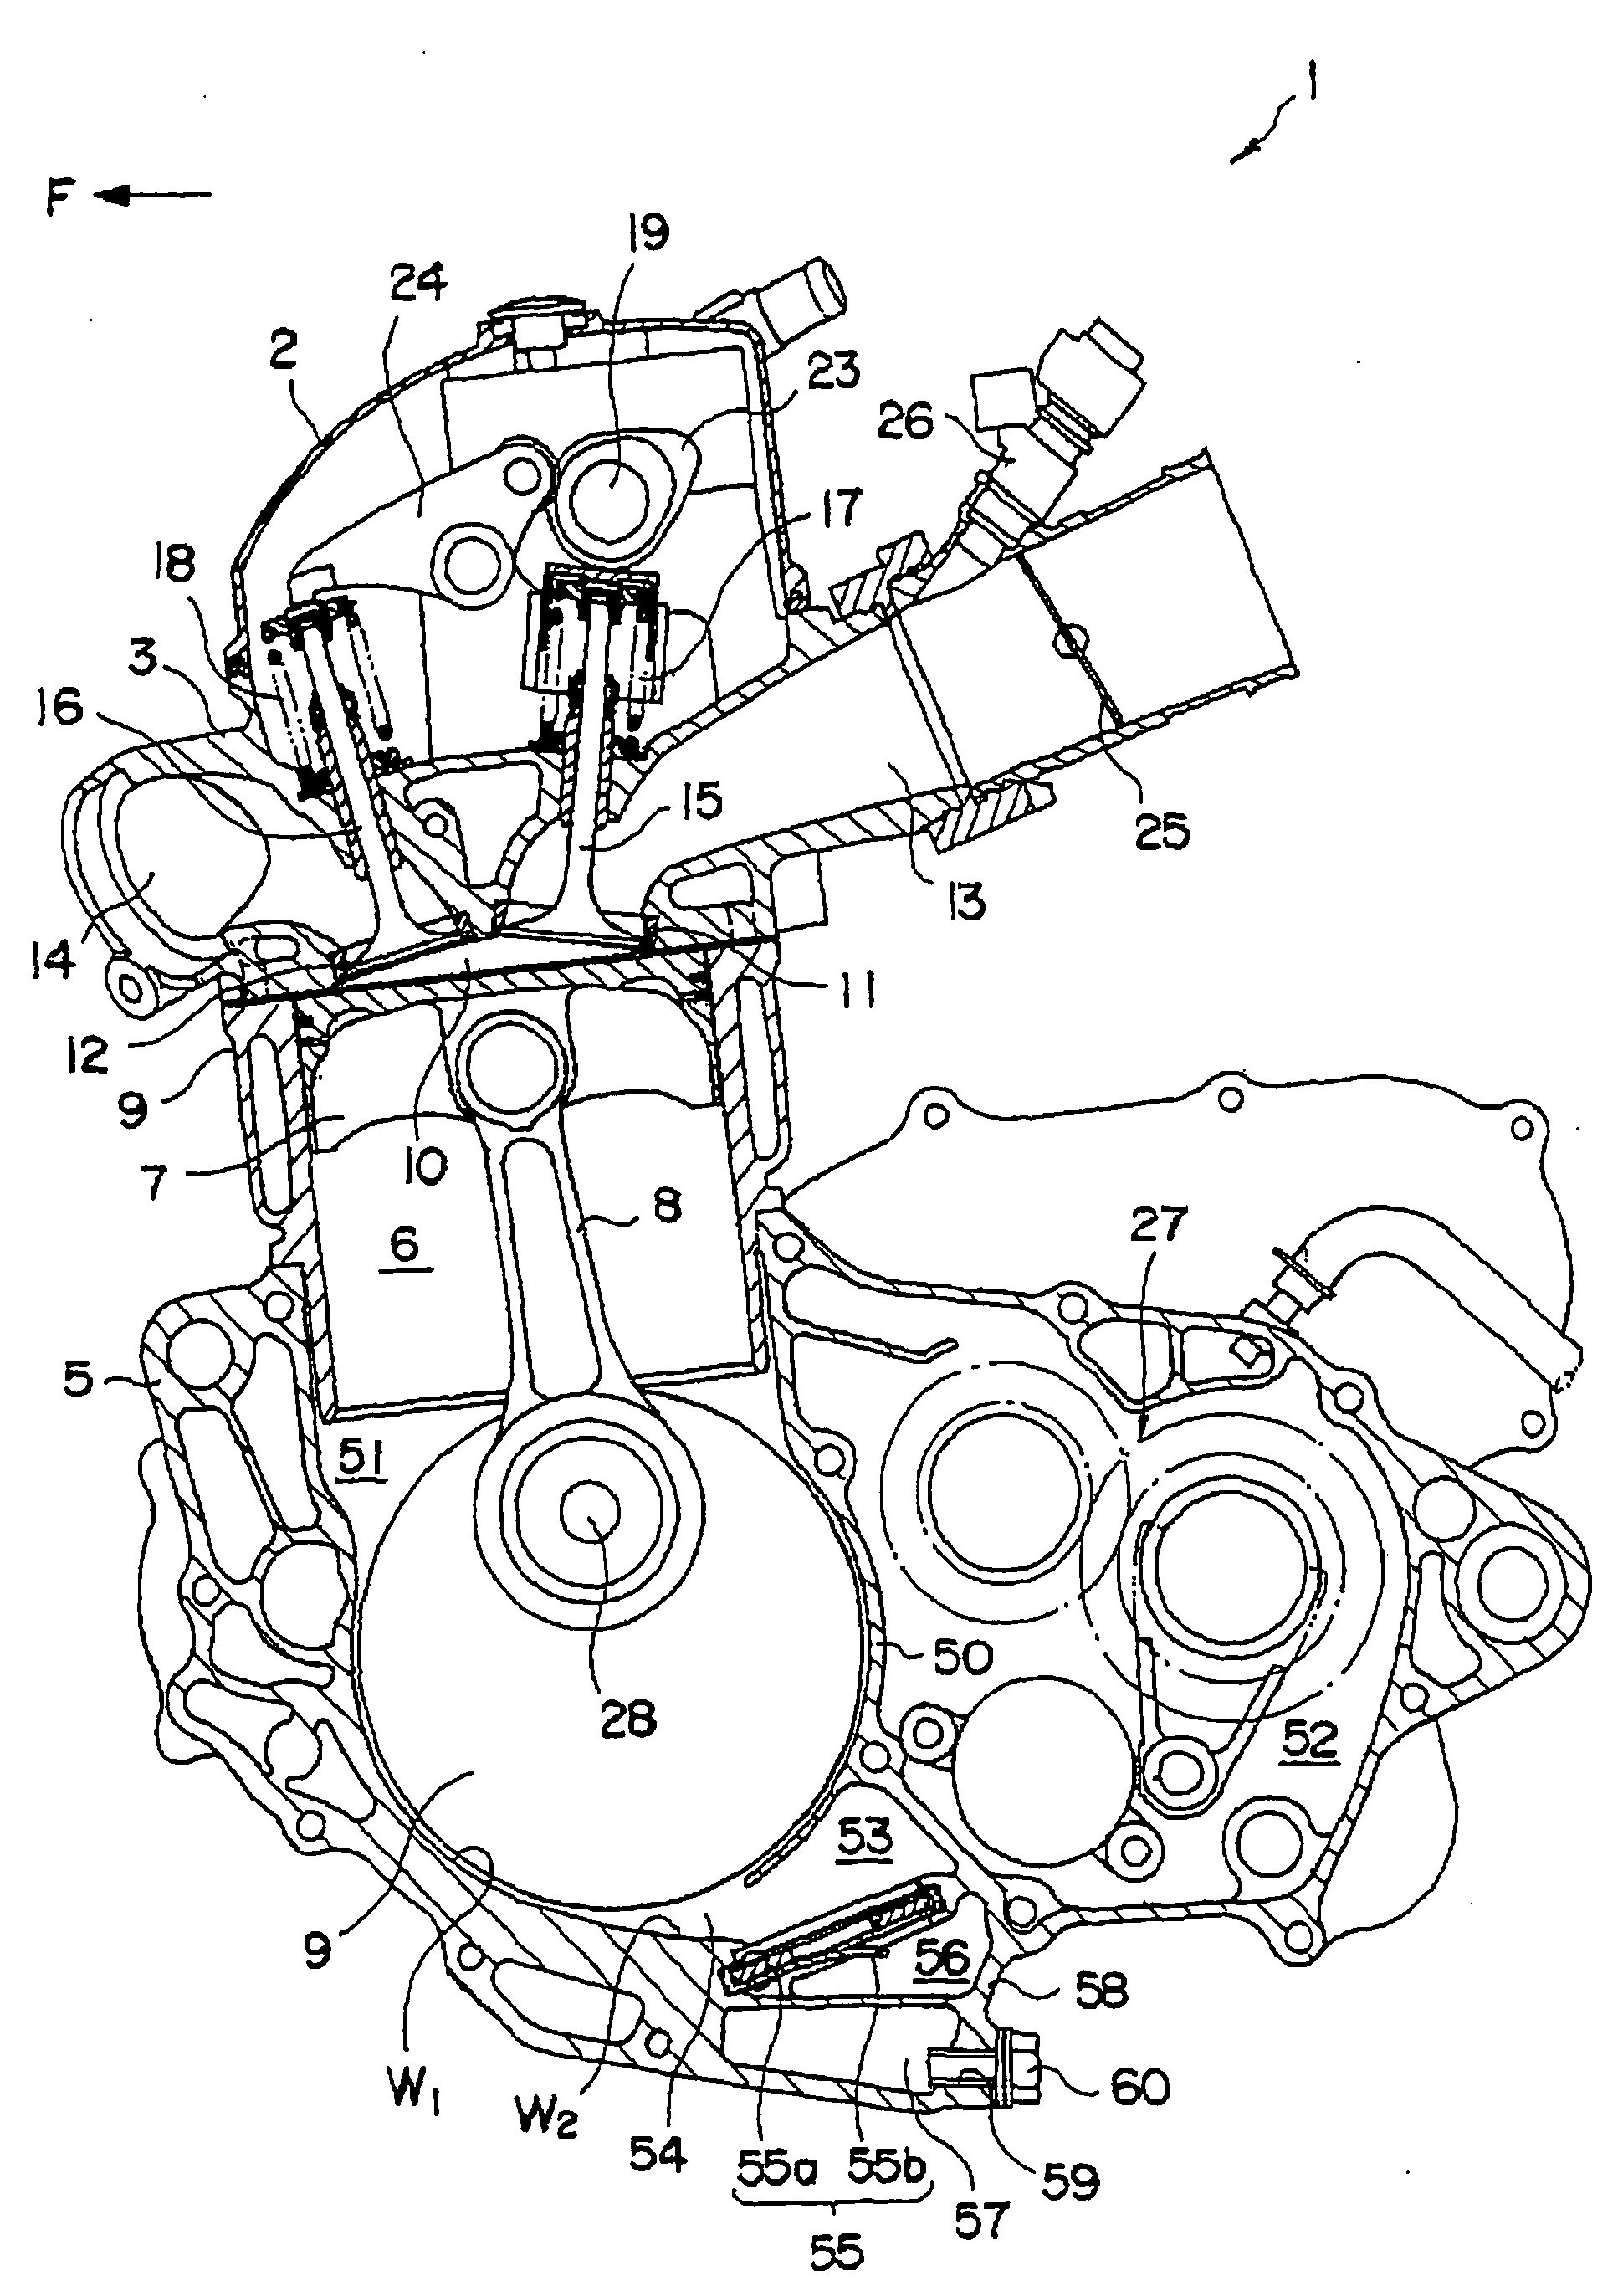 Lubrication structure of engine